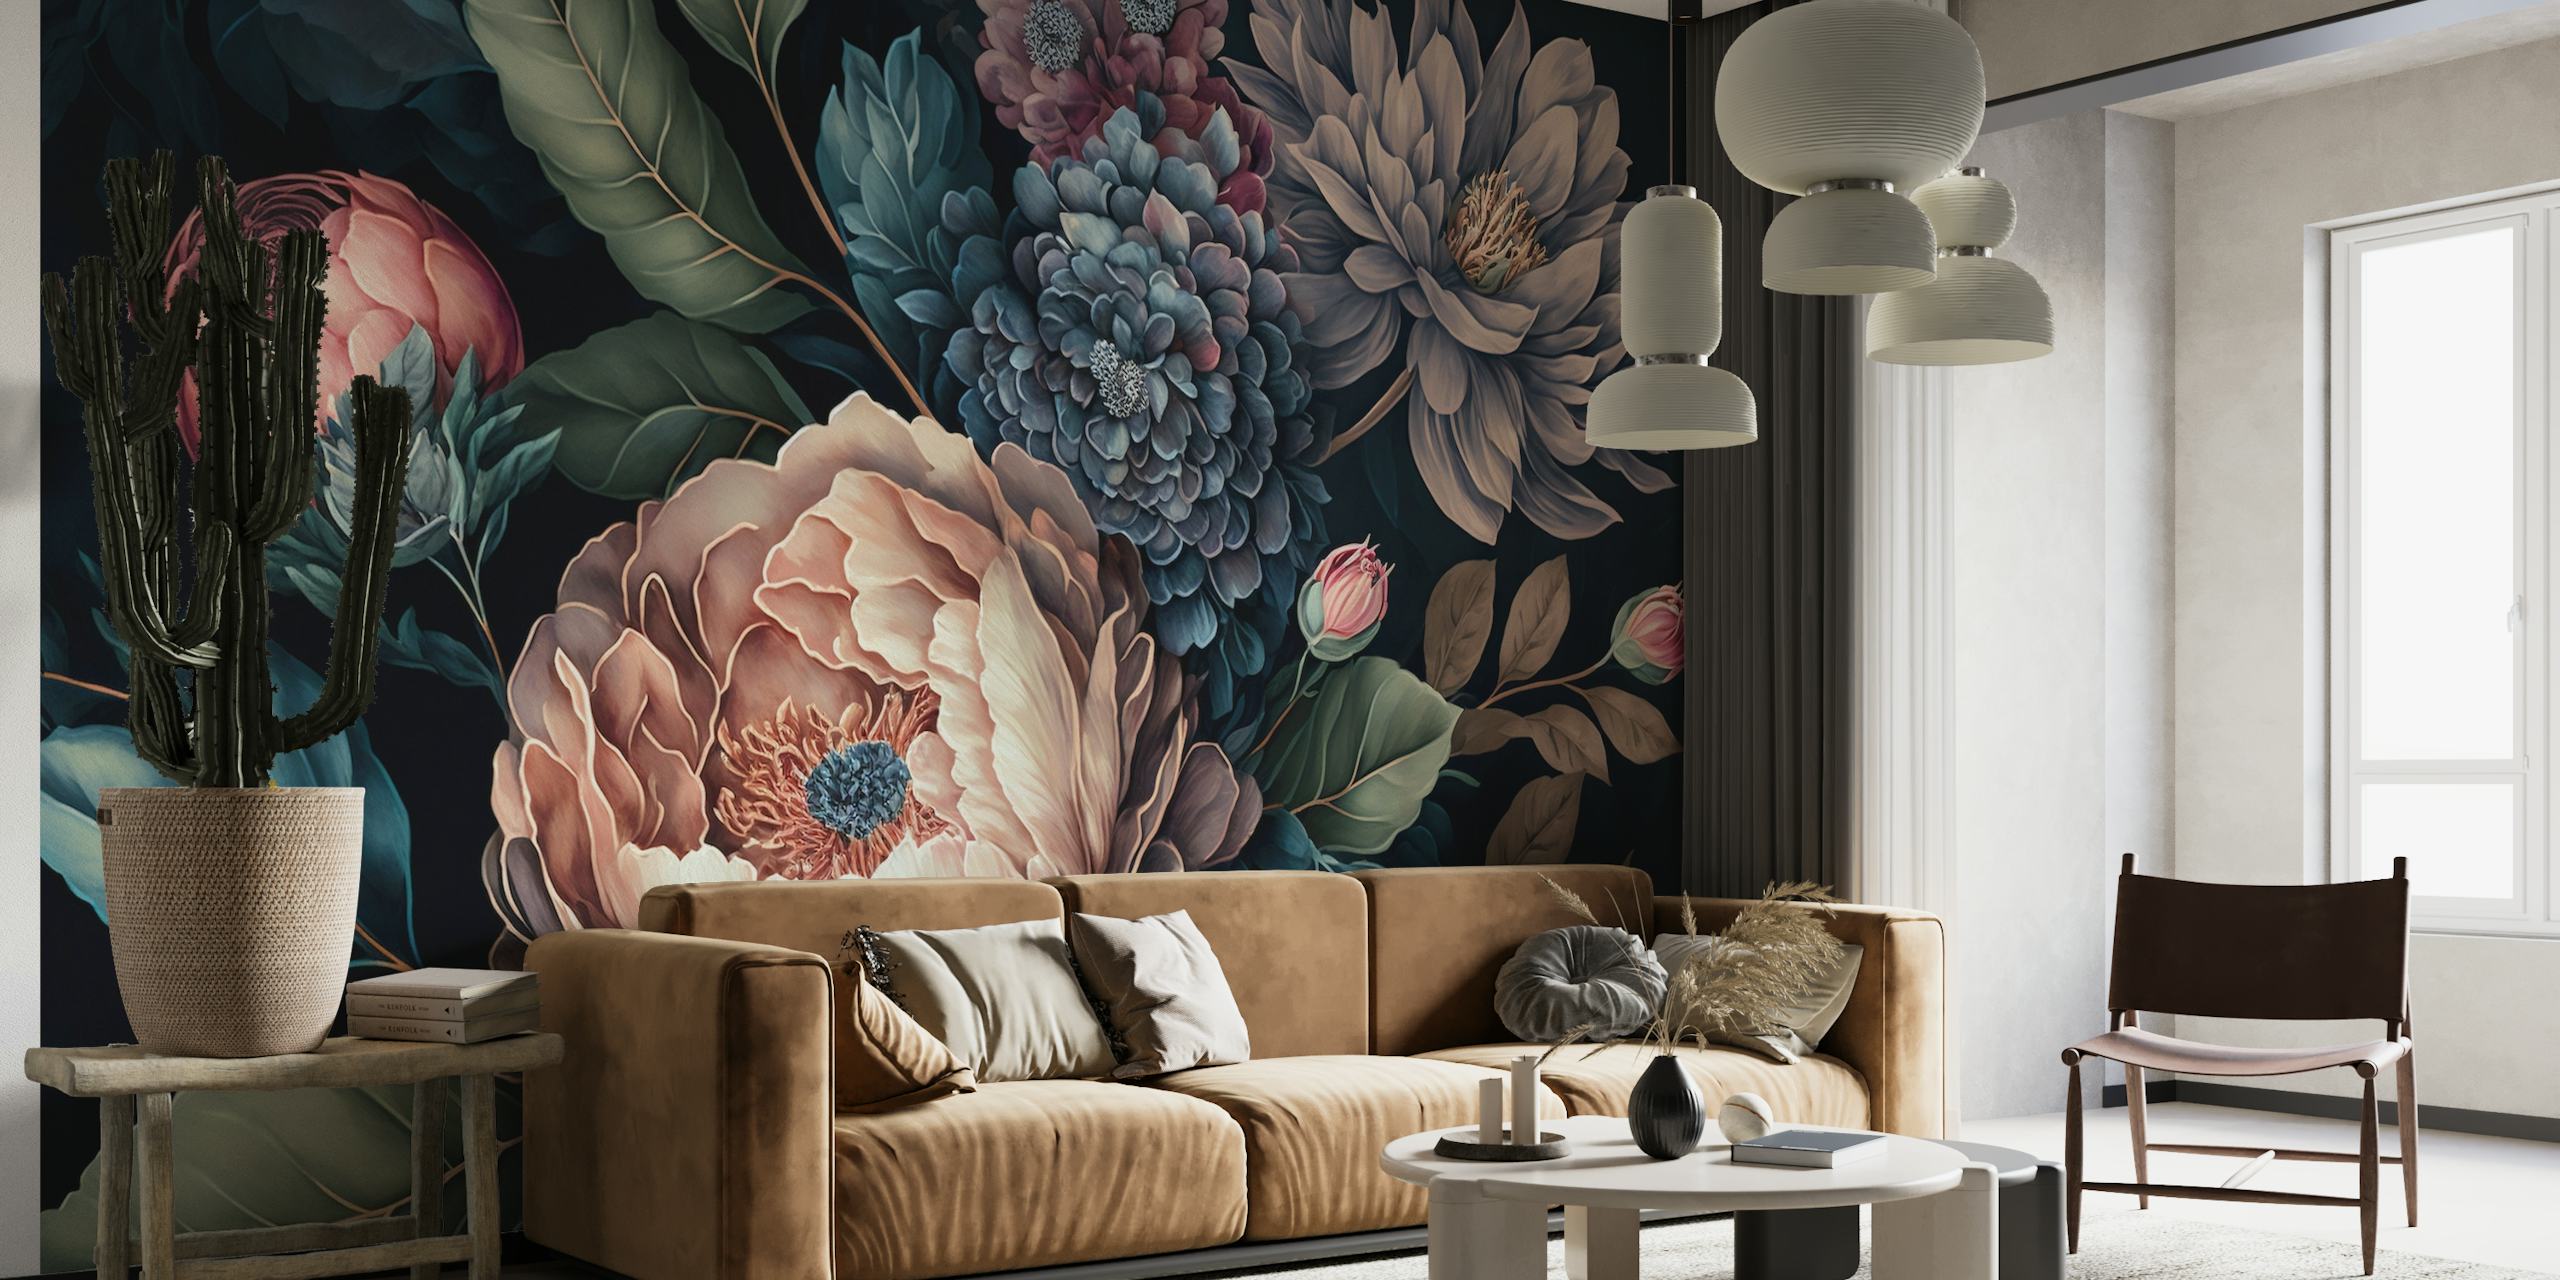 Moody Baroque style large floral wall mural with dark background and richly-hued flowers